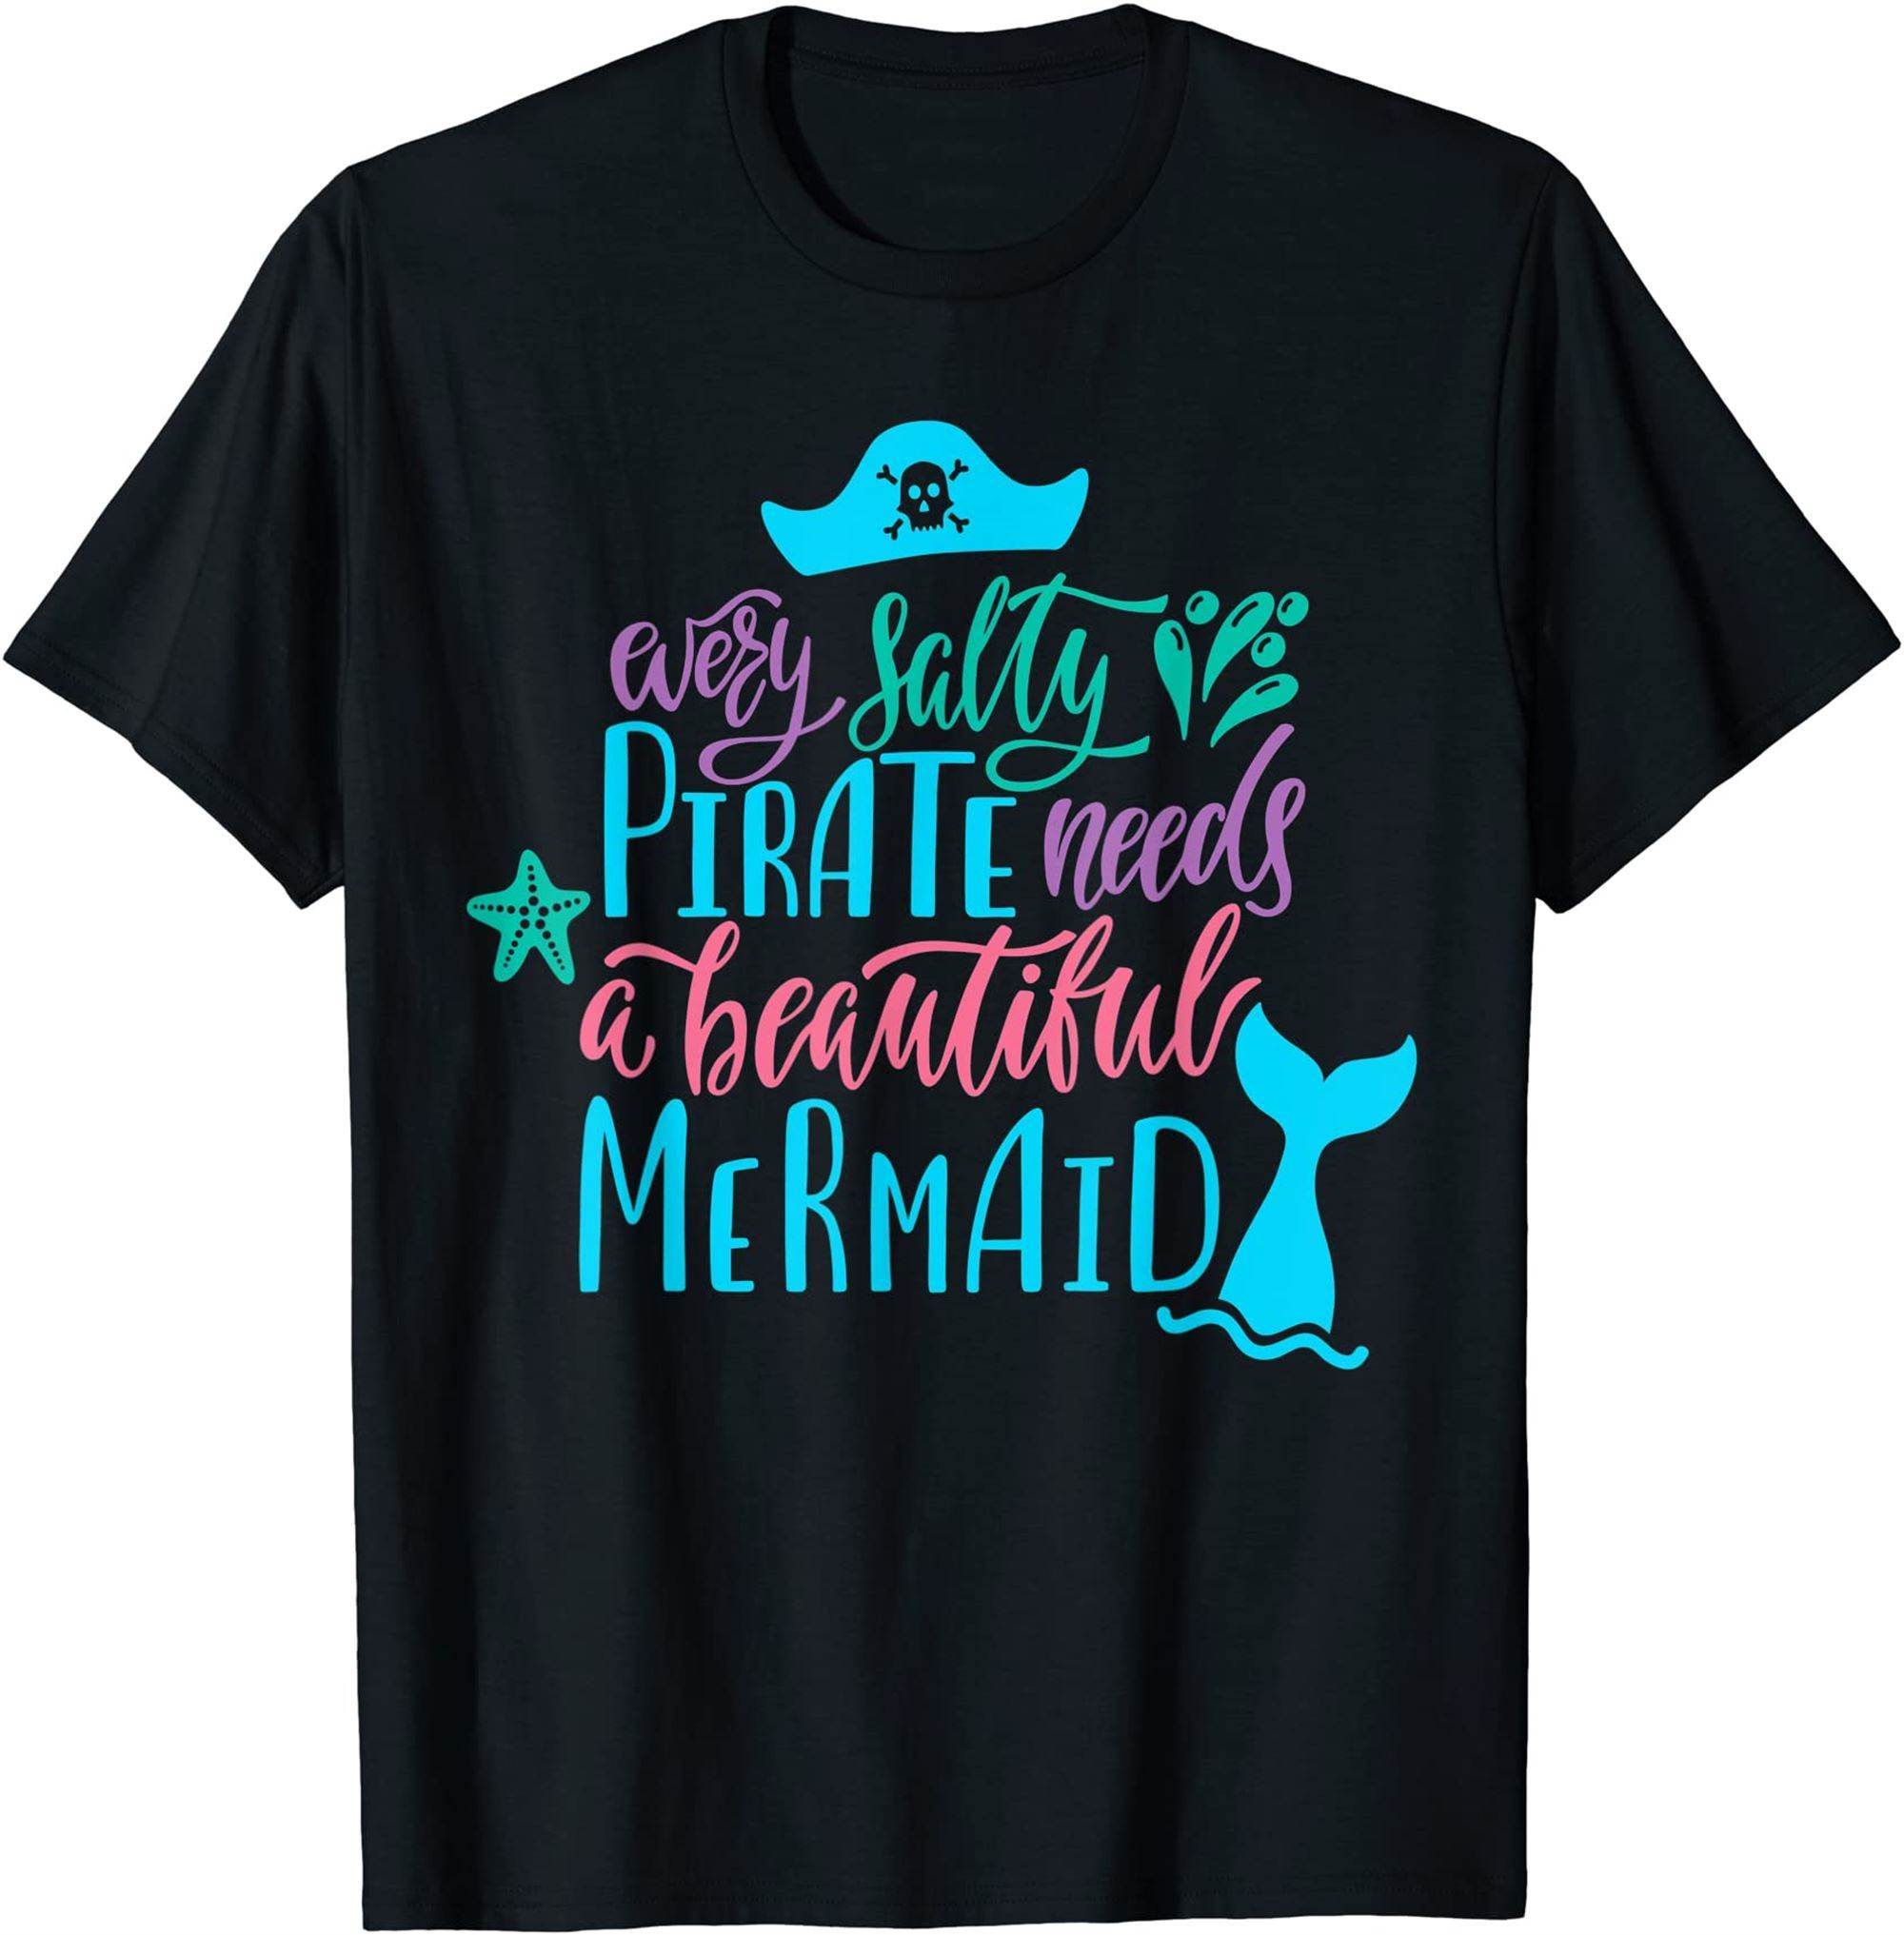 Every Salty Pirate Needs A Beautiful Mermaid T-shirt Size Up To 5xl